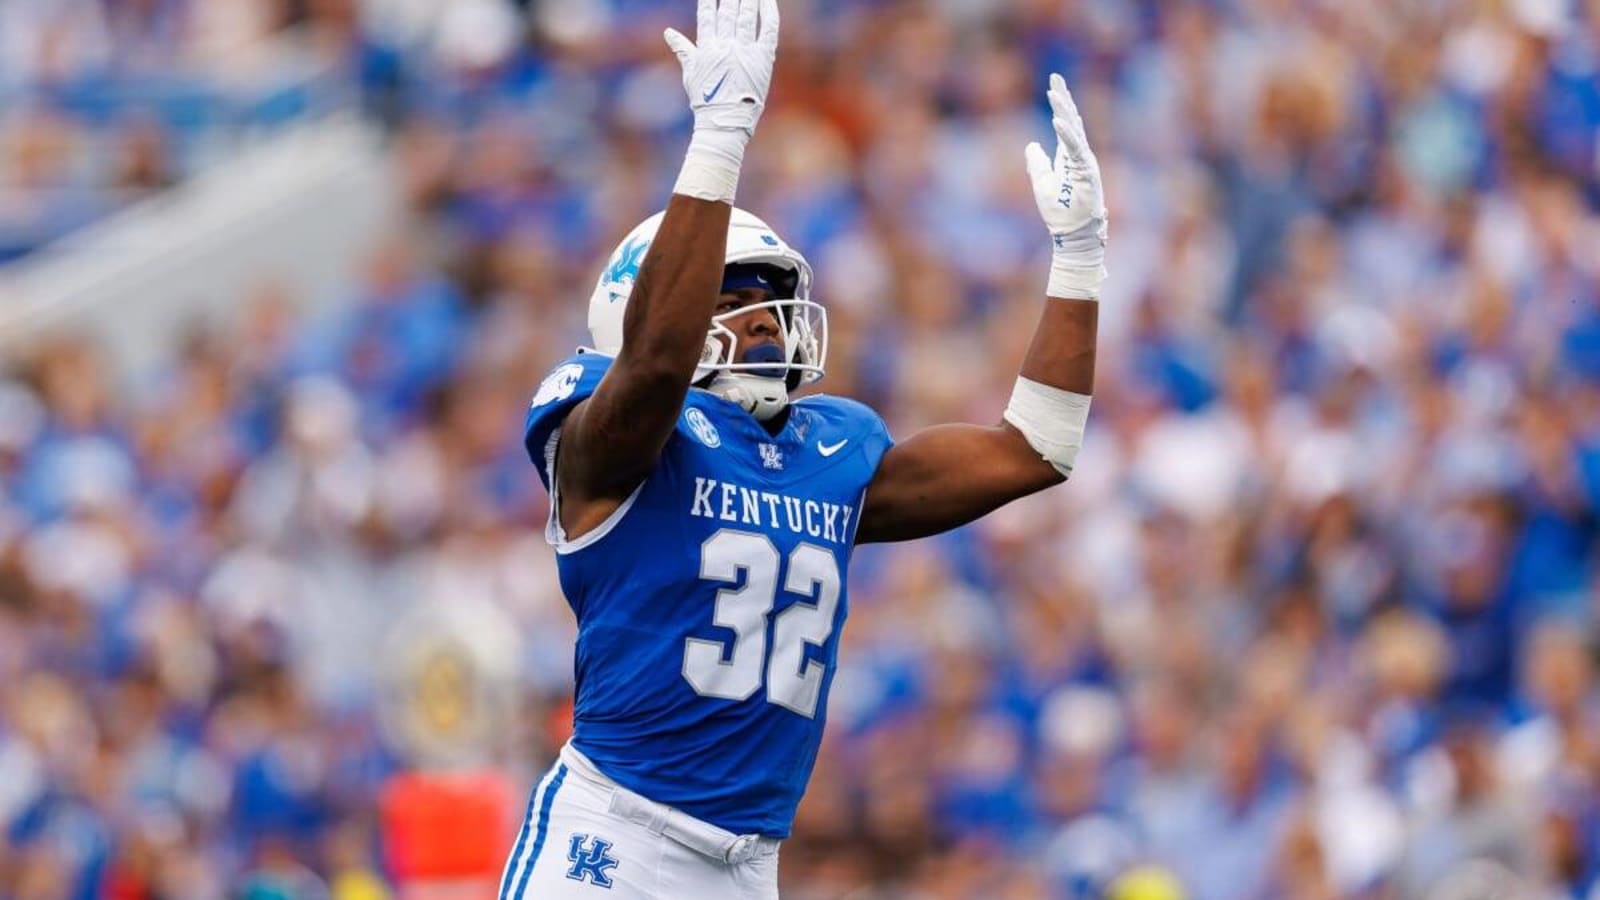 Kentucky Briefing: Trevin Wallace leads the SEC in sacks three games into the season